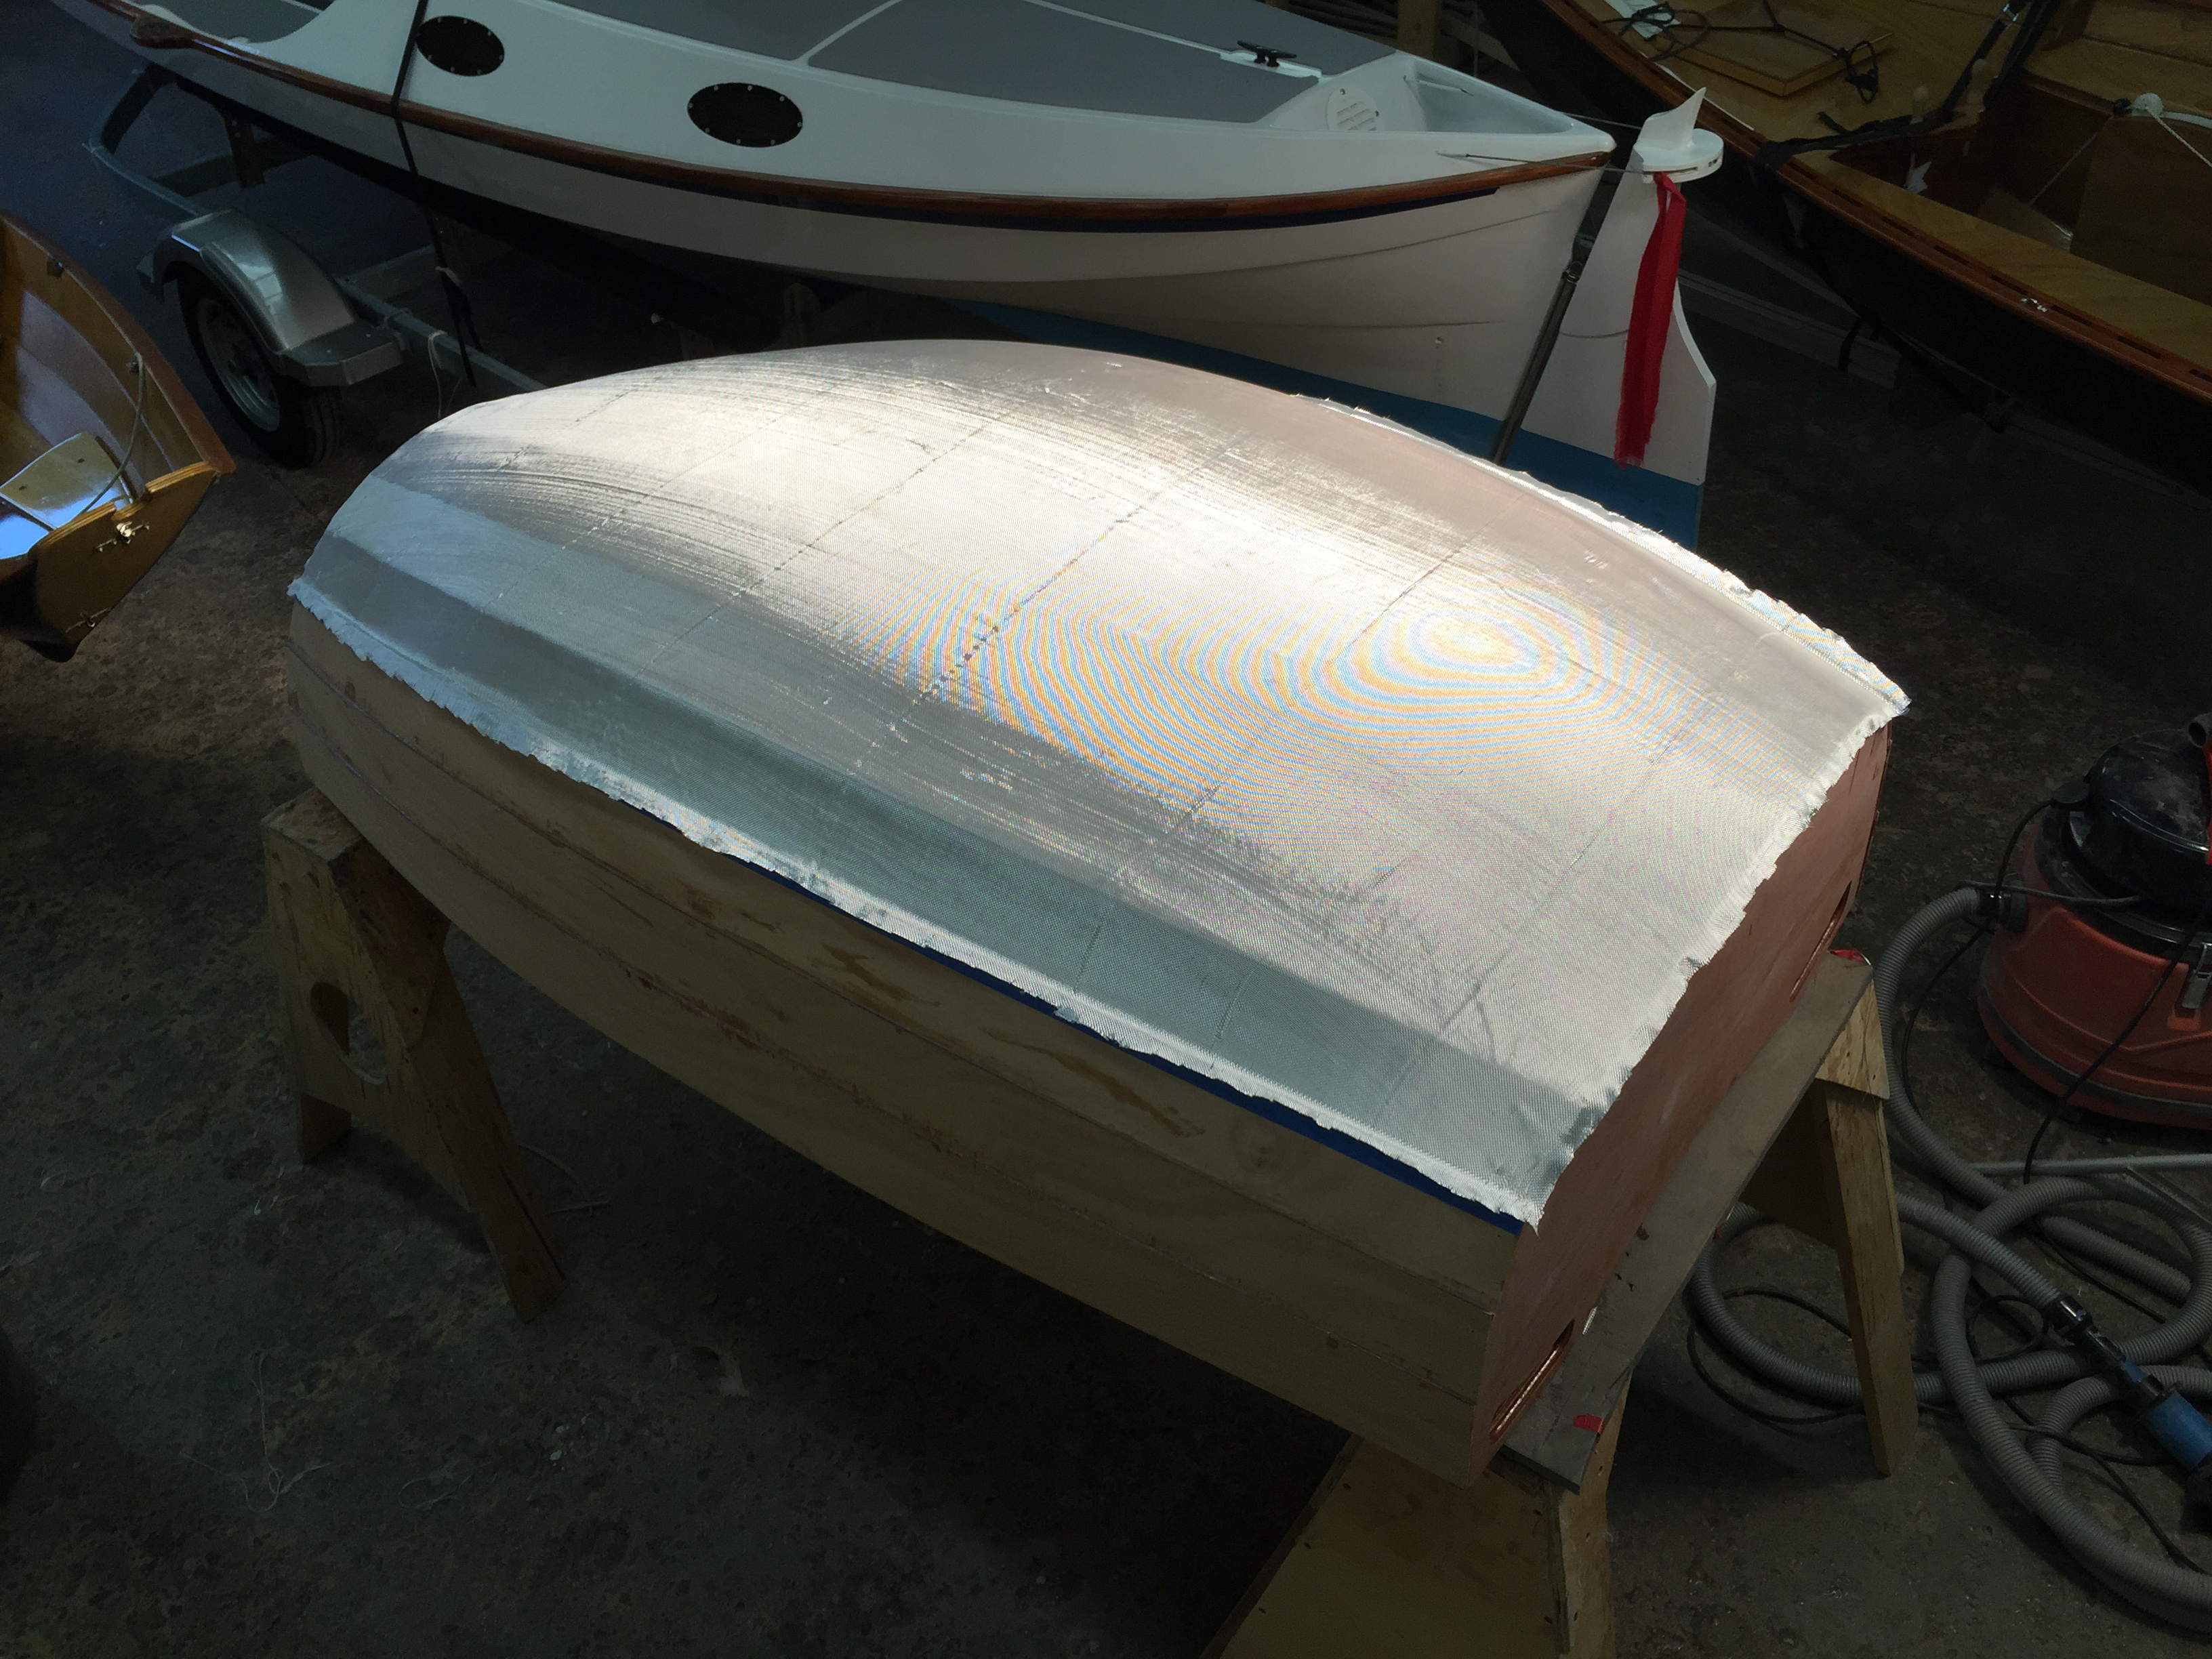 CLC Ultralight Dinghy - Smoothing the Fabric